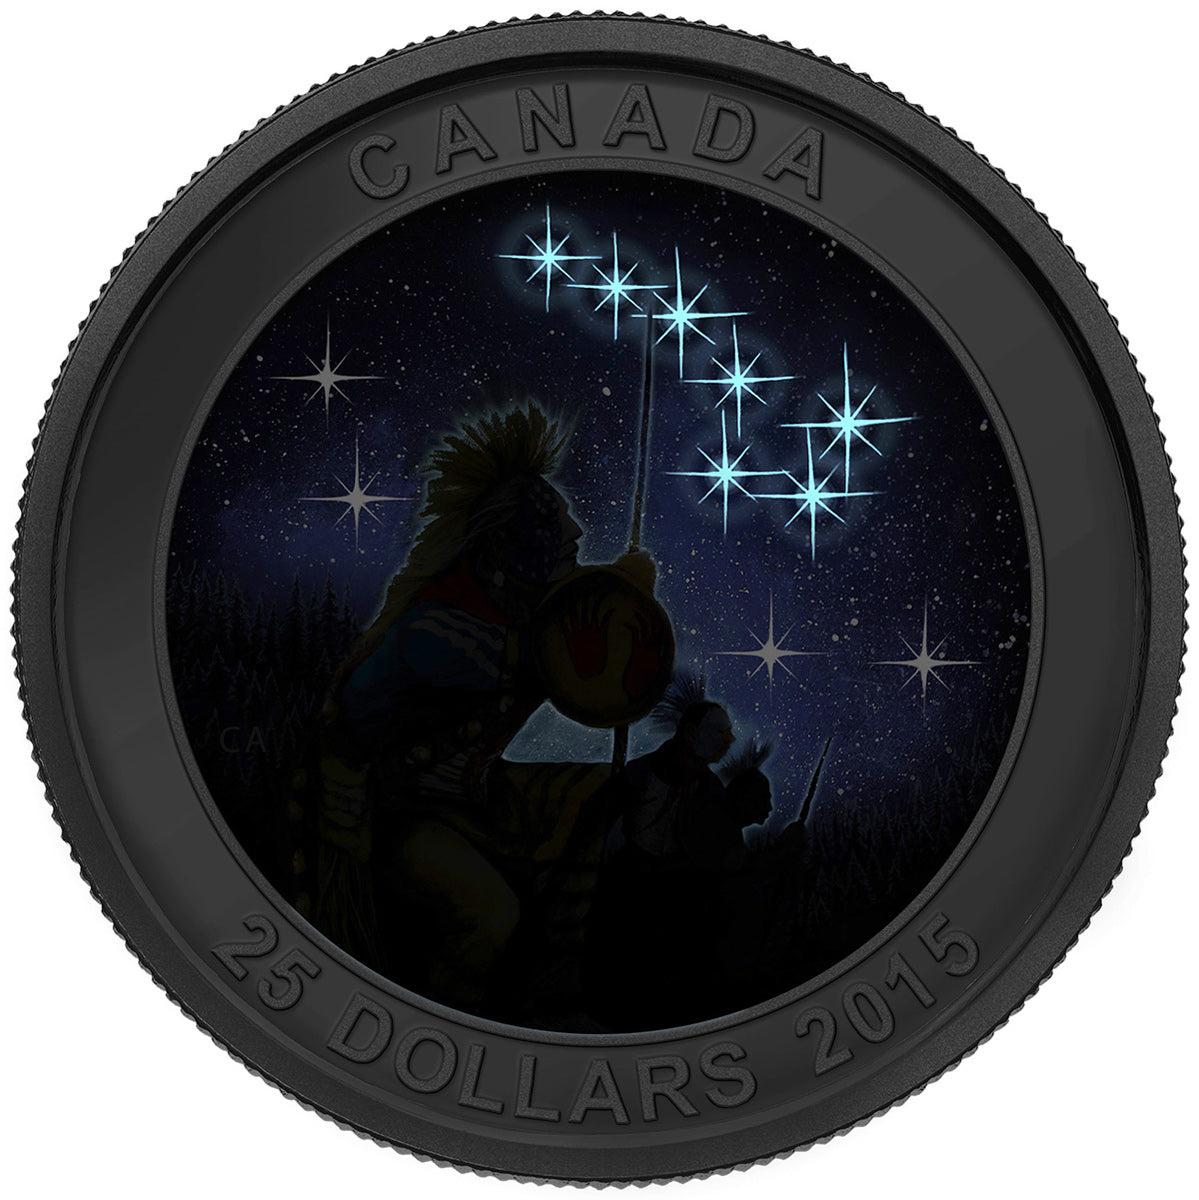 Fine Silver Glow-in-the-Dark Coin – Star Charts: The Quest – Mintage: 7,500 (2015)